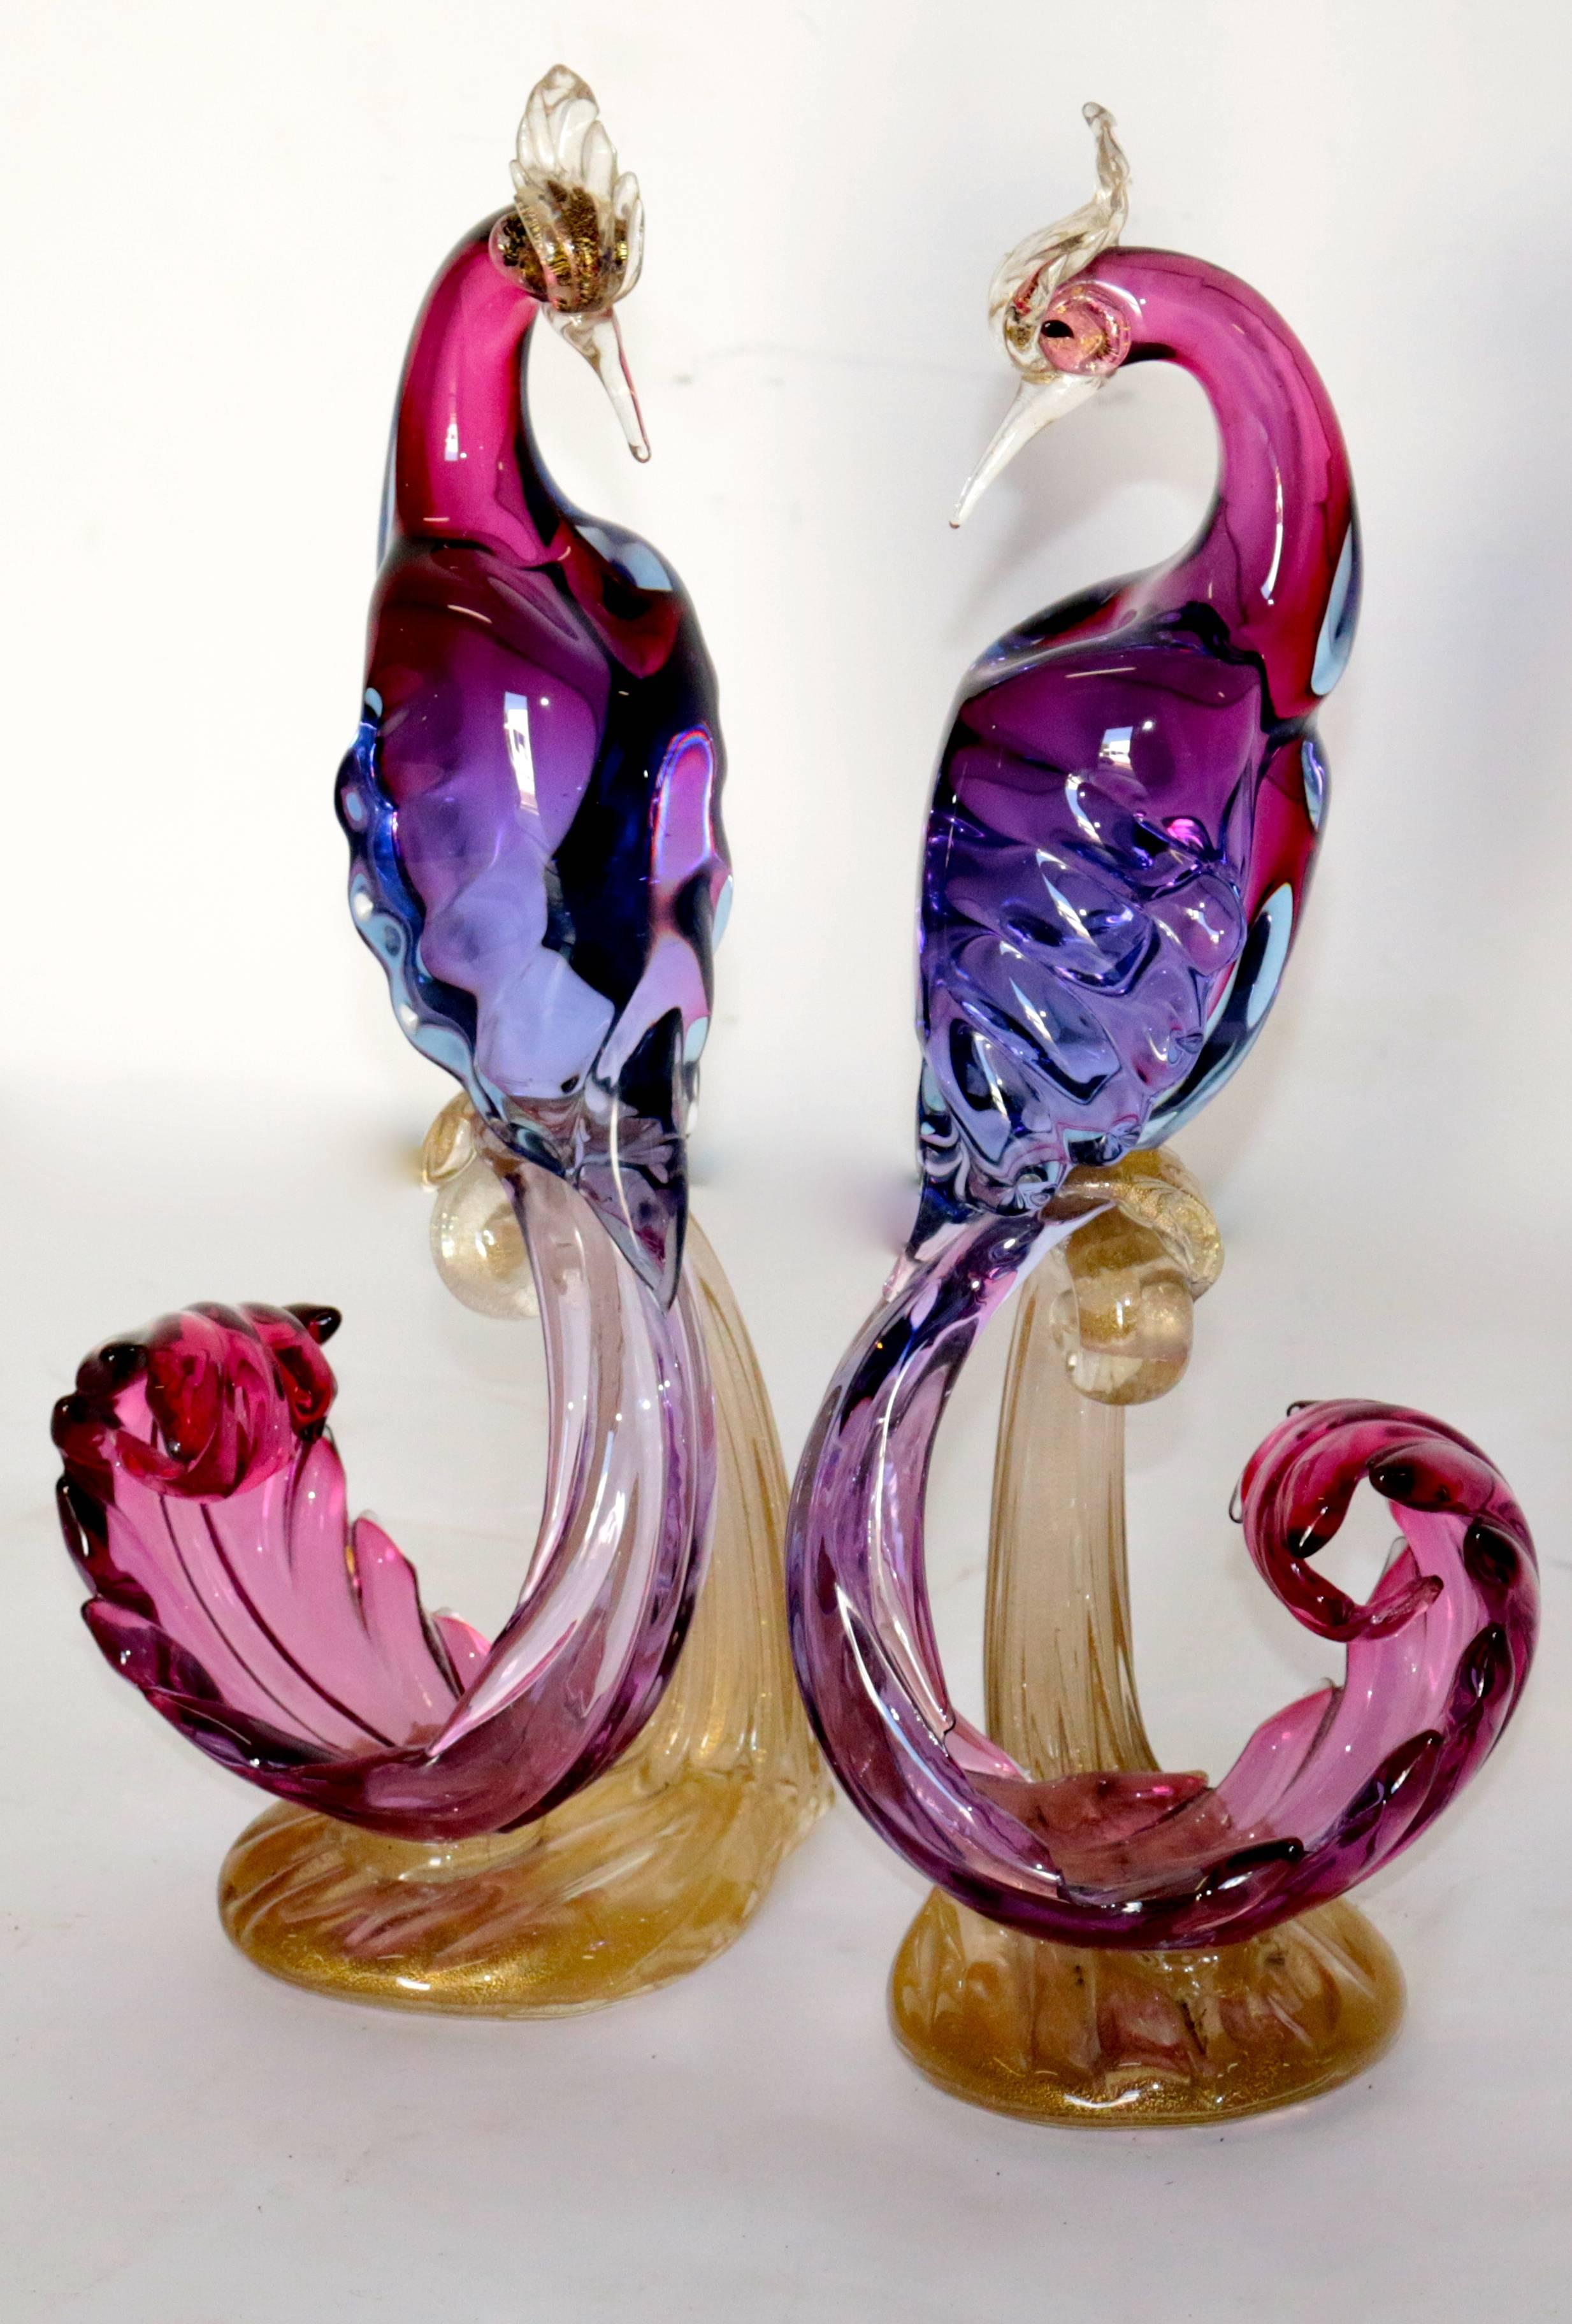 Pair of midcentury Murano birds of paradise with amazing color. These Murano birds show lush color. There are gold flecks throughout the entire base as well as the head of the birds. The center body shows curve the extravagant curves and the